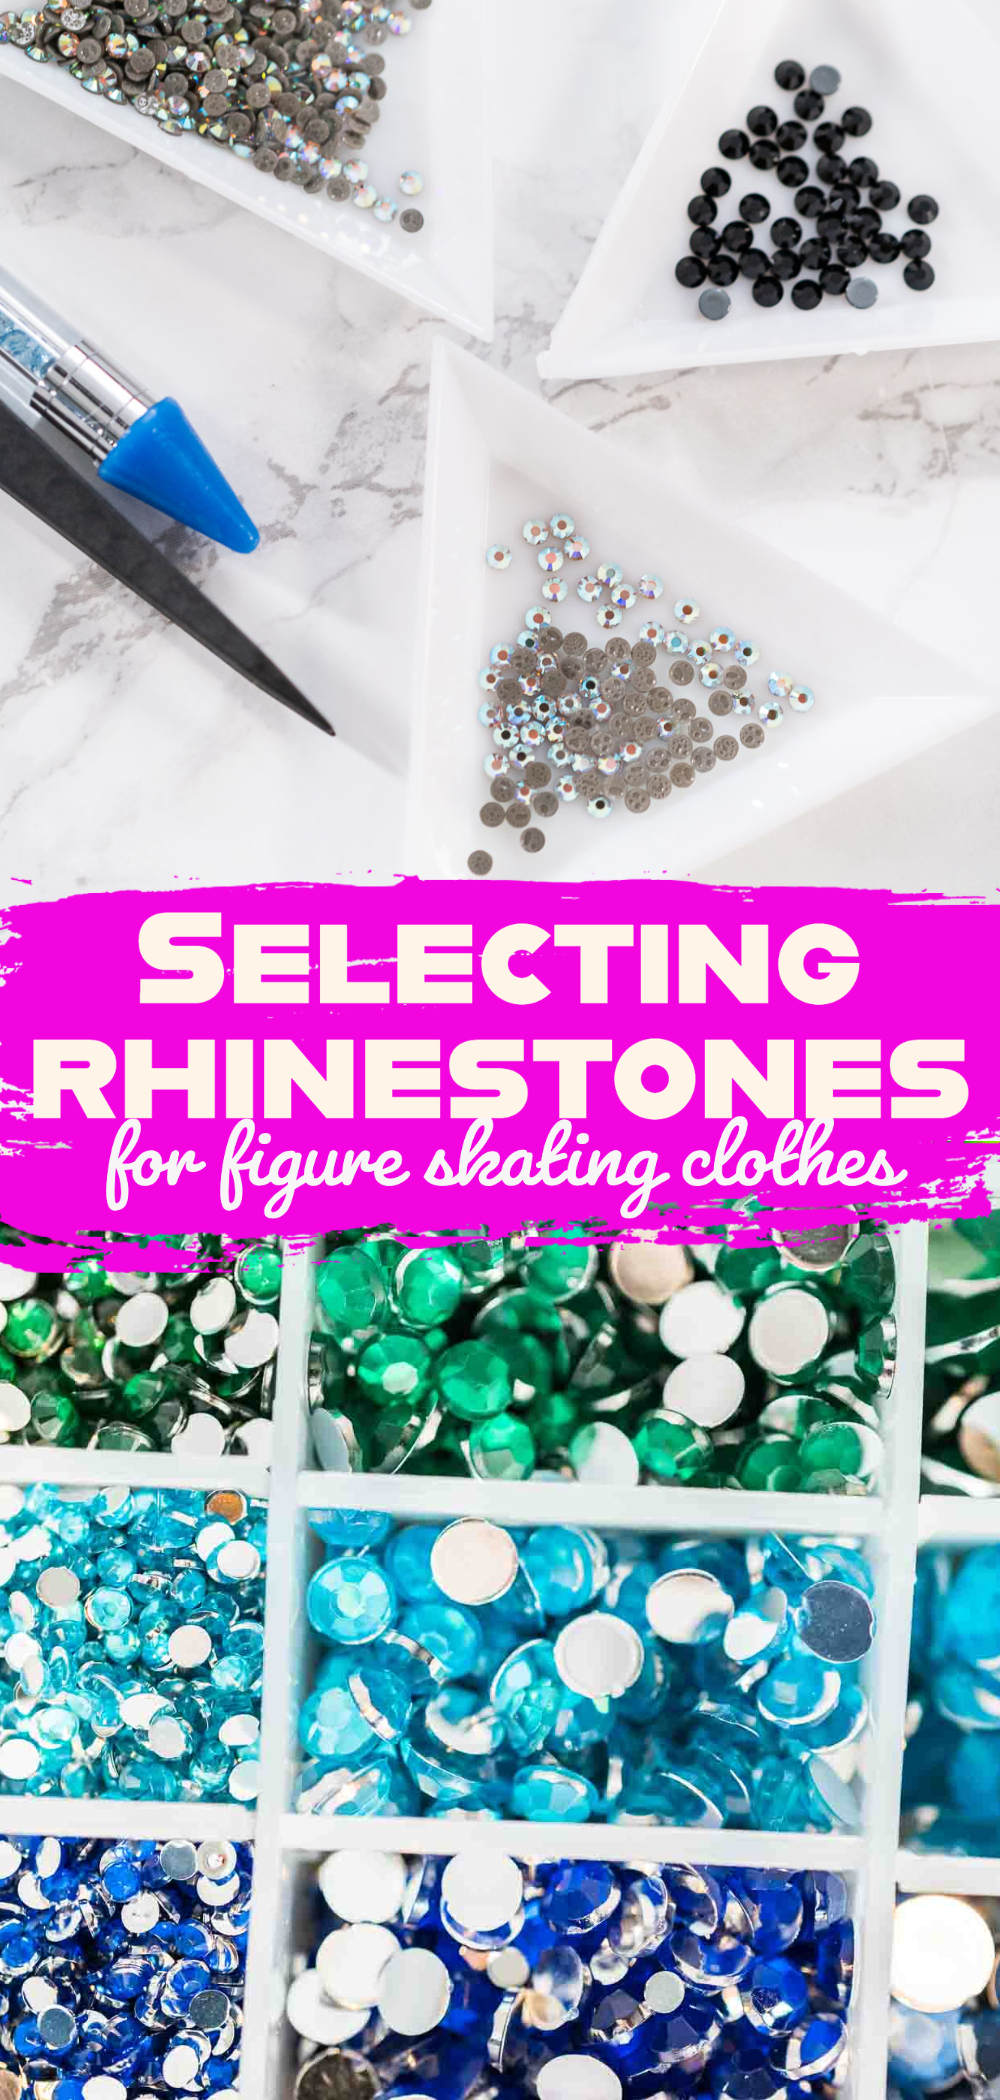 Selecting rhinestones for figure skating clothes